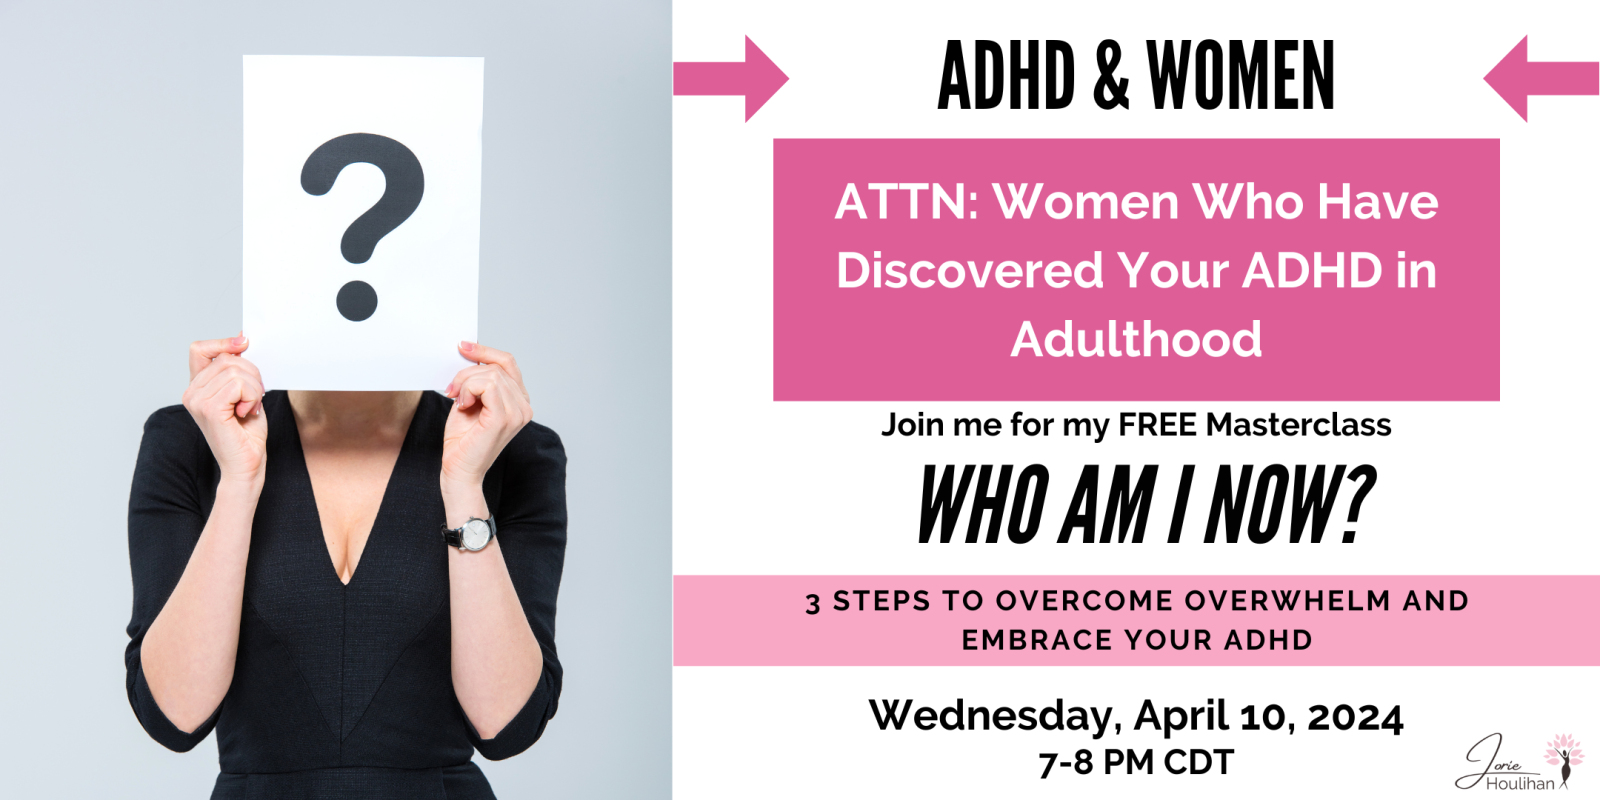 ADHD & Women: Who Am I Now? 